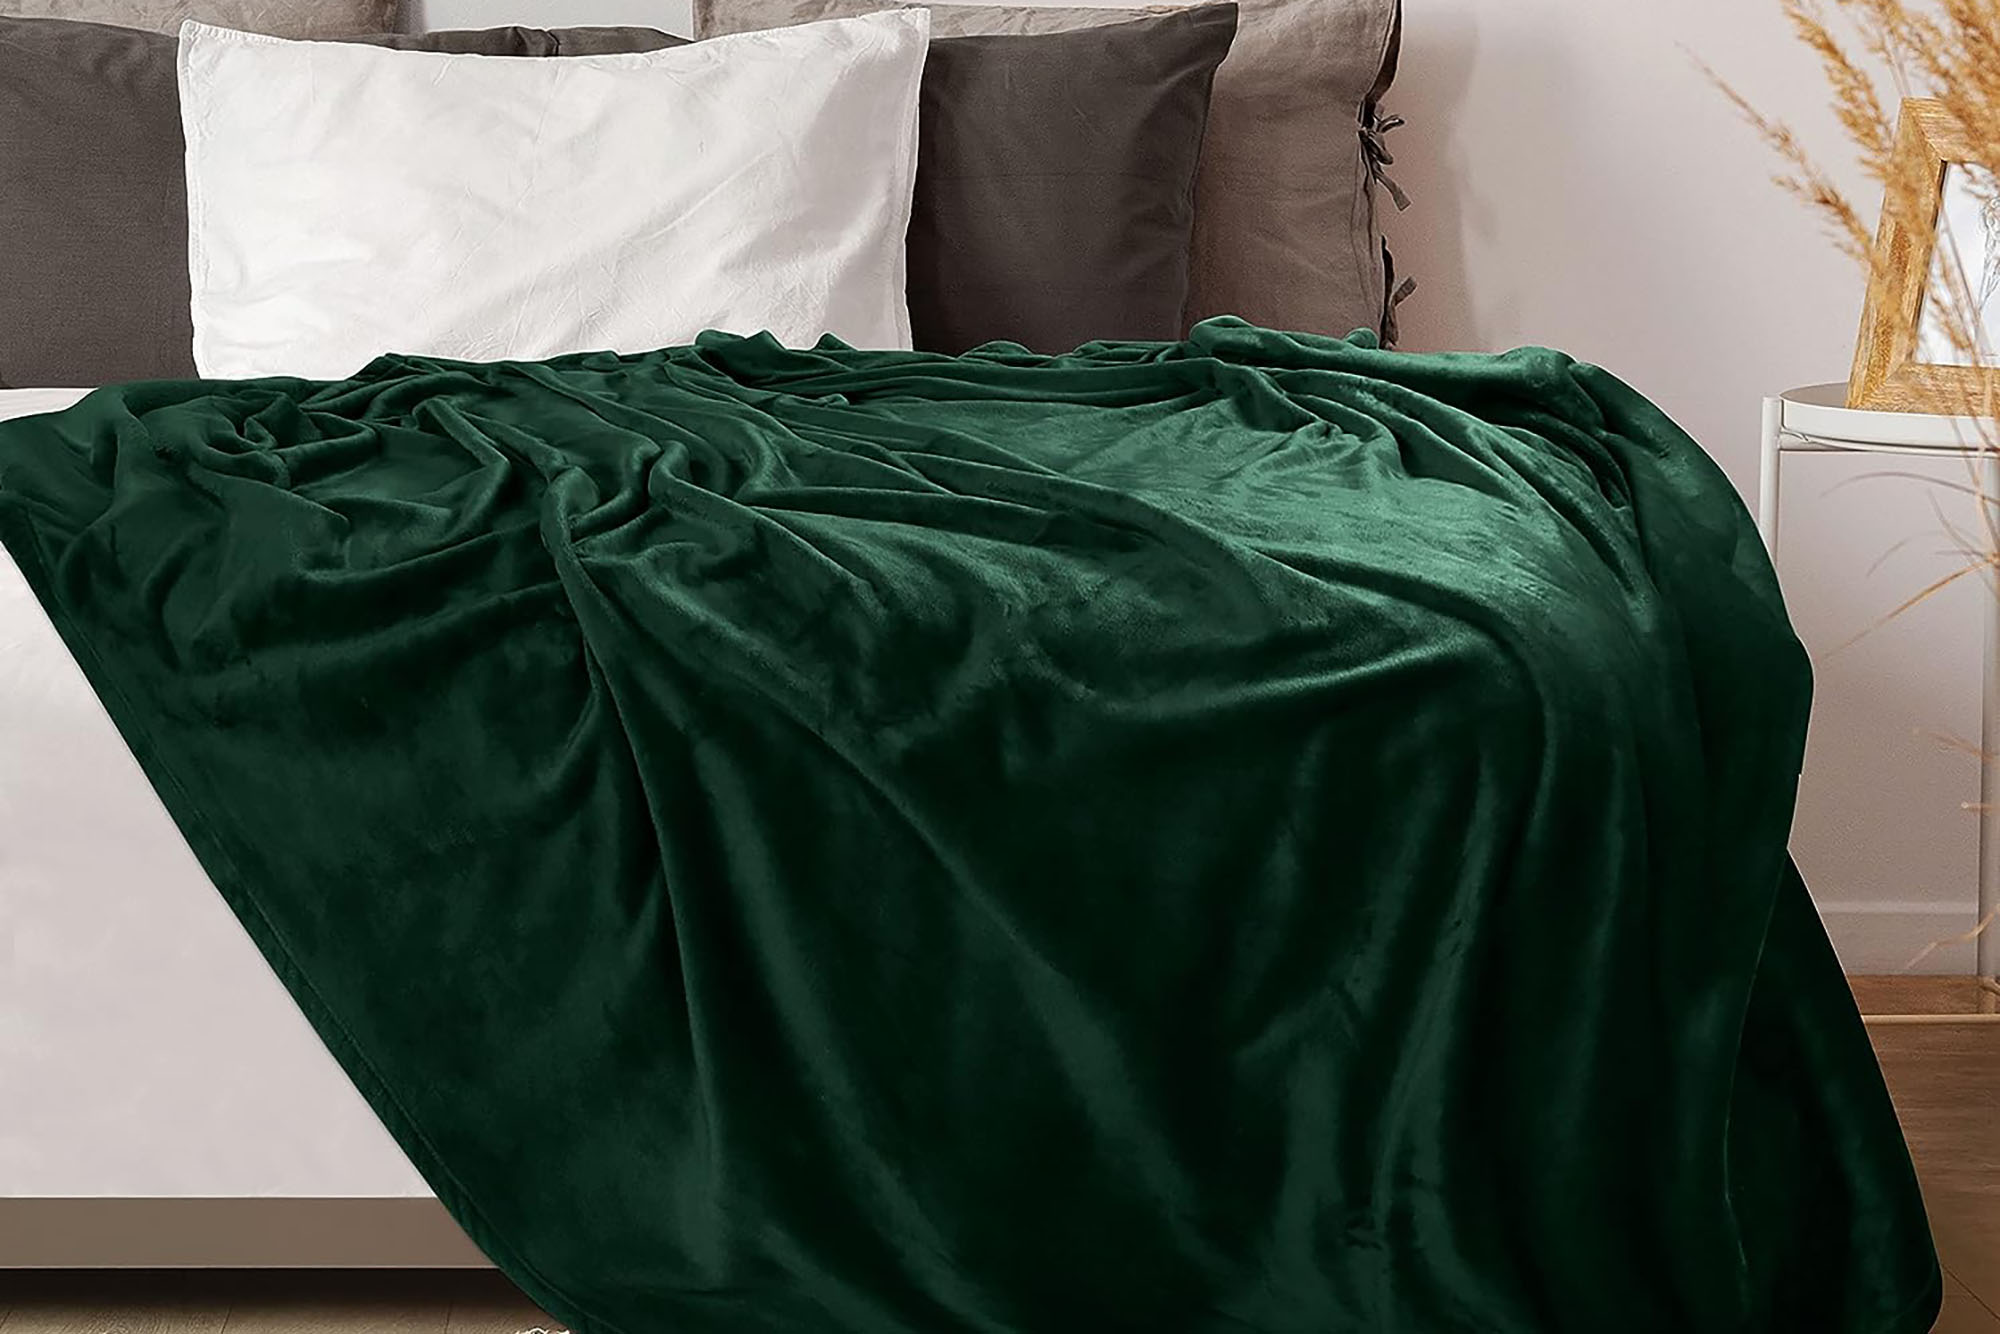 The Utopia Bedding Fleece Blanket Is Up to 52% Off at